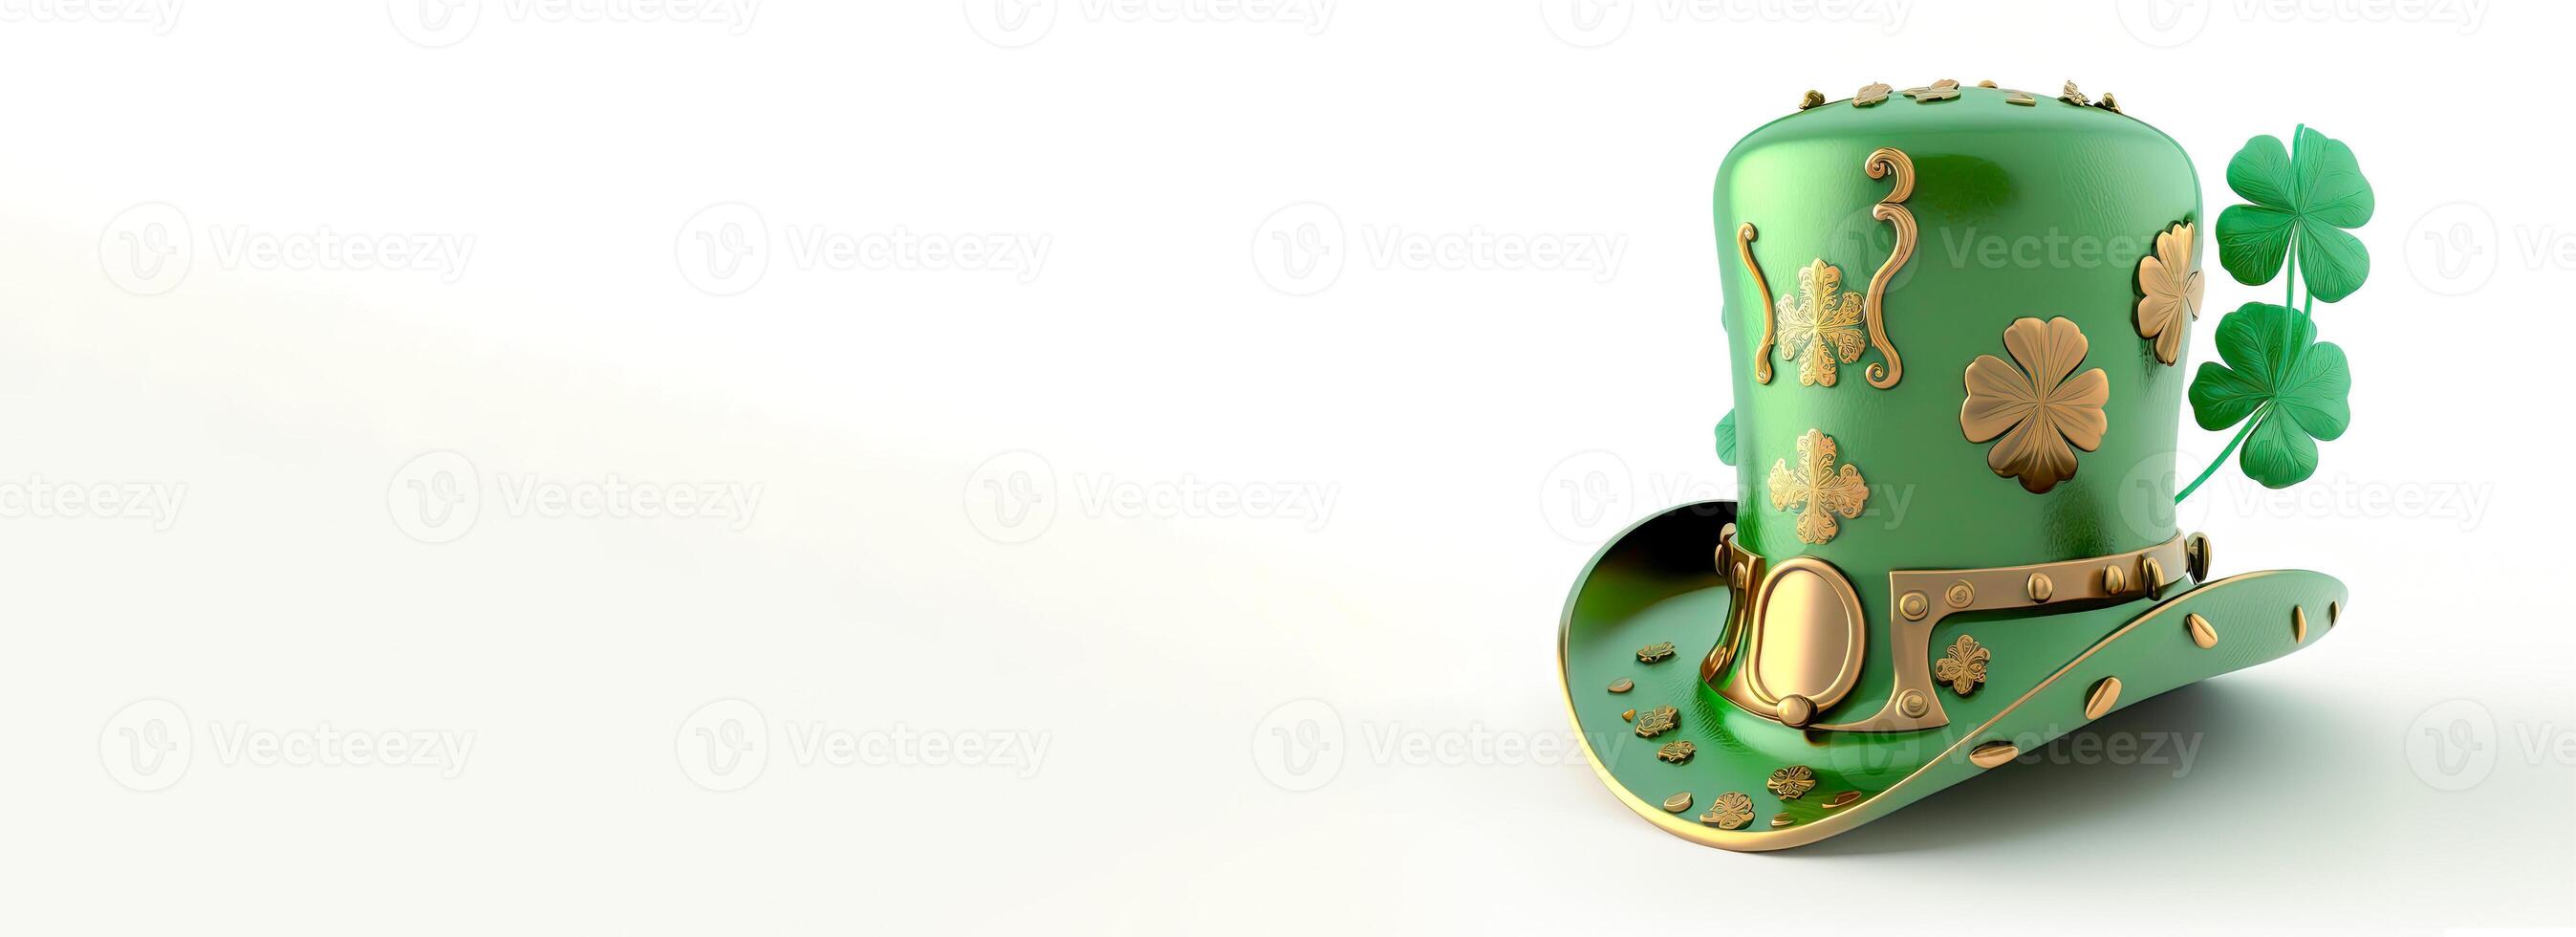 3D Render of Clover Leaves Printed Leprechaun Hat In Green And Golden Color On White Background. St. Patrick's Day Concept. photo